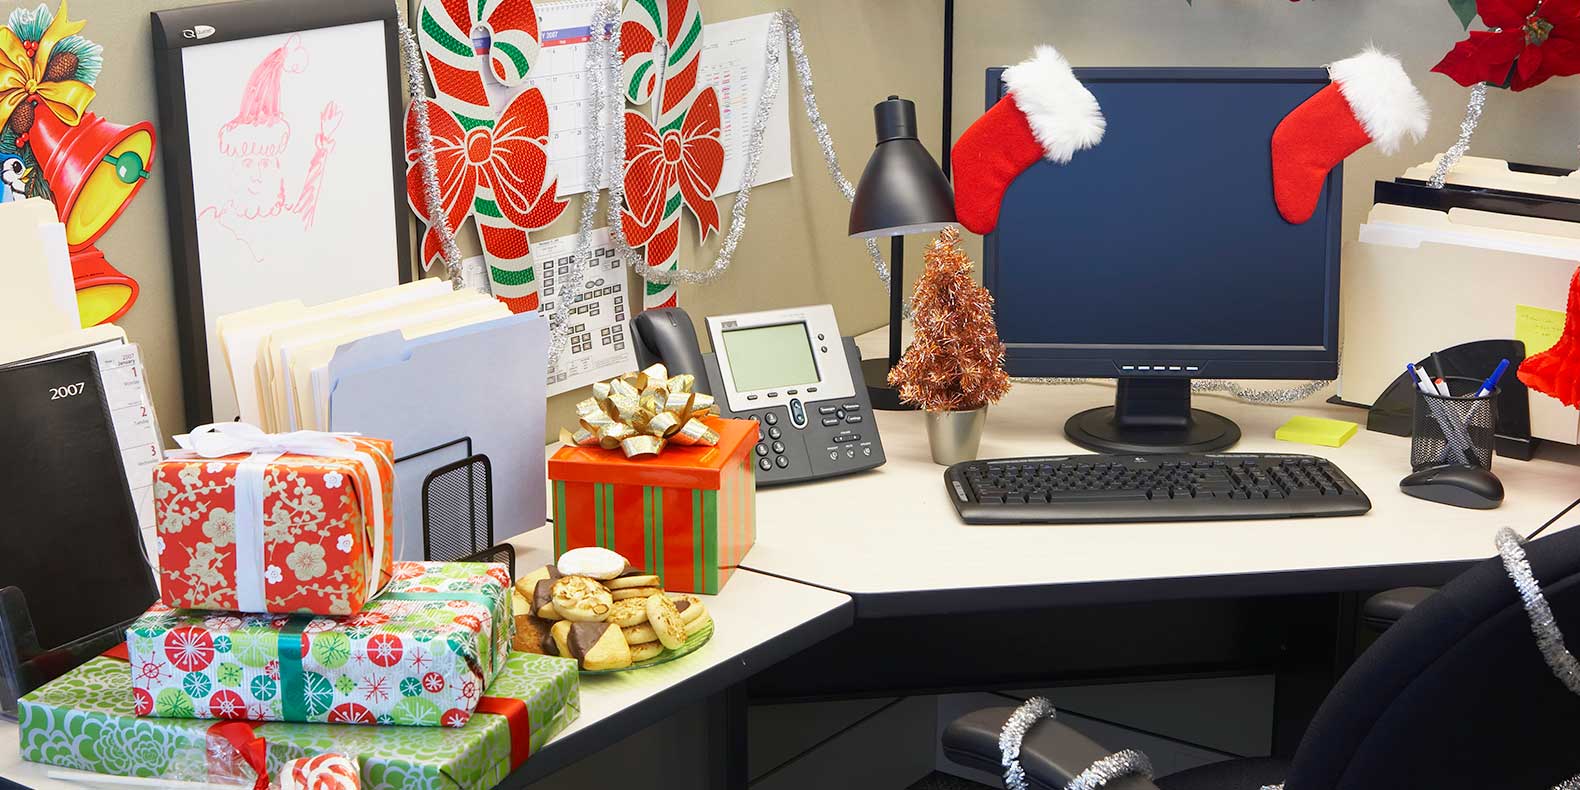 5 Security Tips to Keep Your Business Safe During the Holiday Season